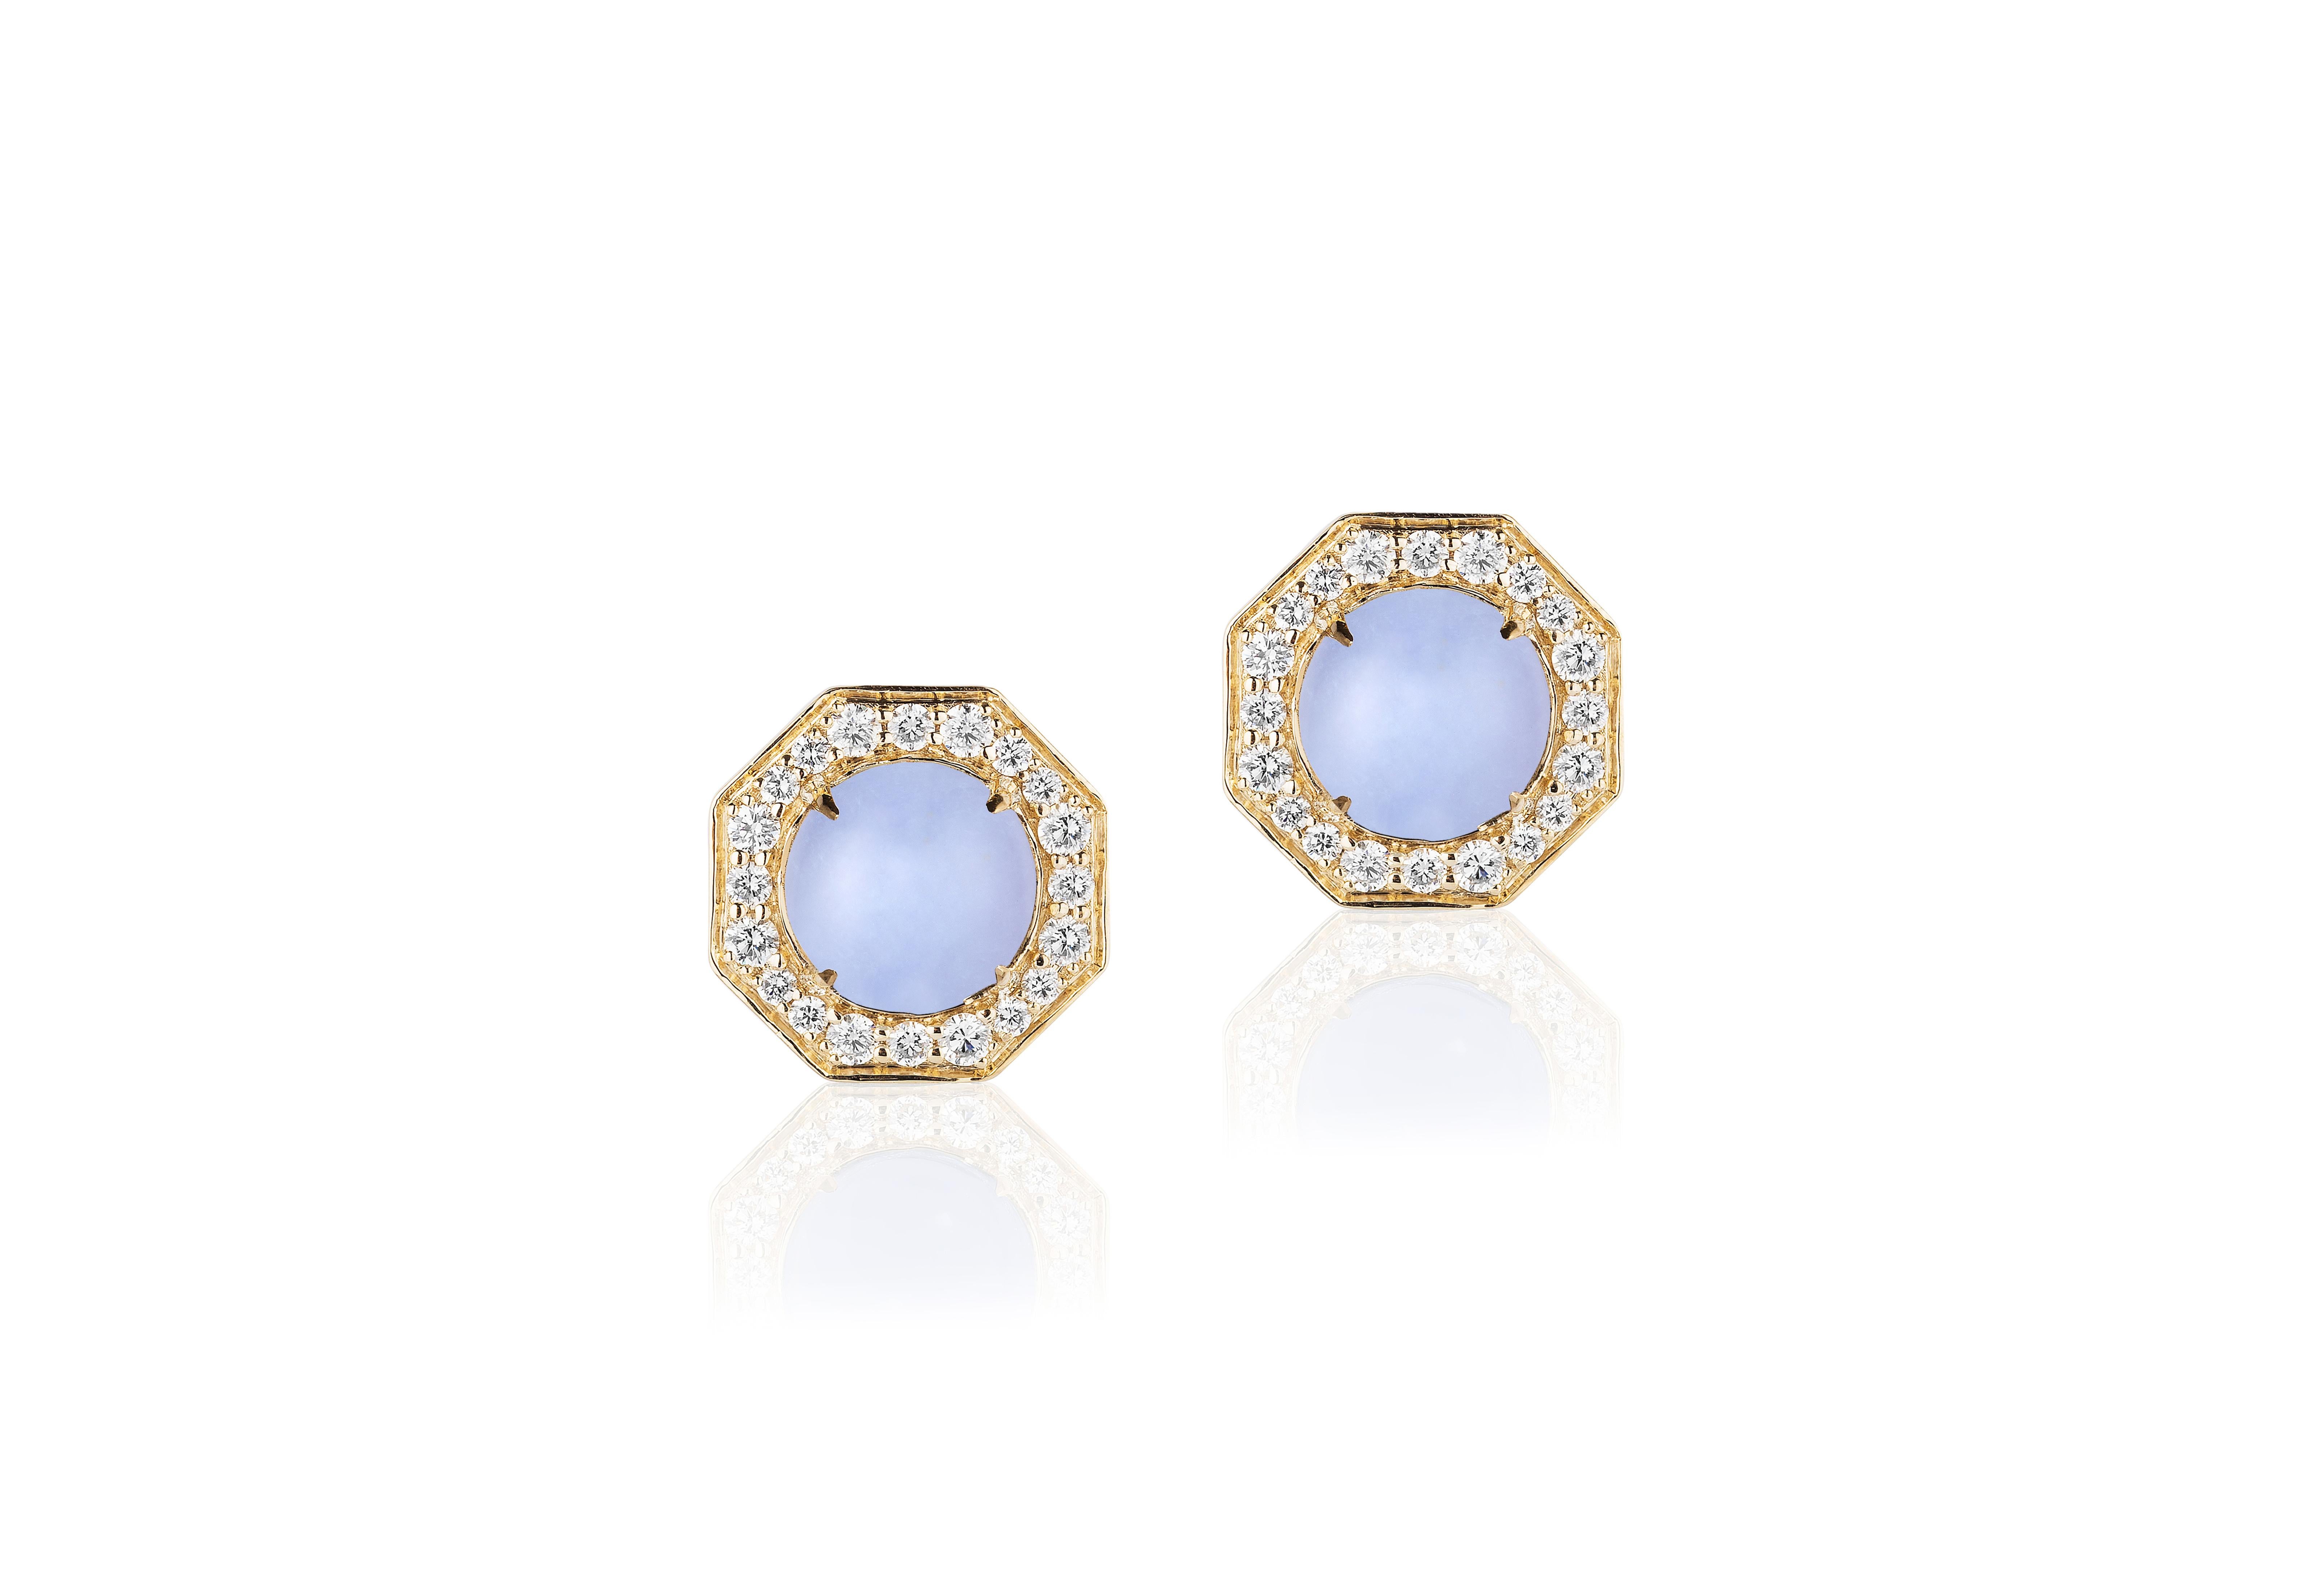 Blue Chalcedony Small Pendant with Diamonds in 18k Yellow Gold, from 'Rock N Roll' Collection

Stone Size: 8 mm

Gemstone Weight:  Chalcedony- 1.25 Carats

Diamond: G-H / VS. Approx Wt: 0.36 Carats

Blue Chalcedony Stud Earrings with Diamonds in 18k